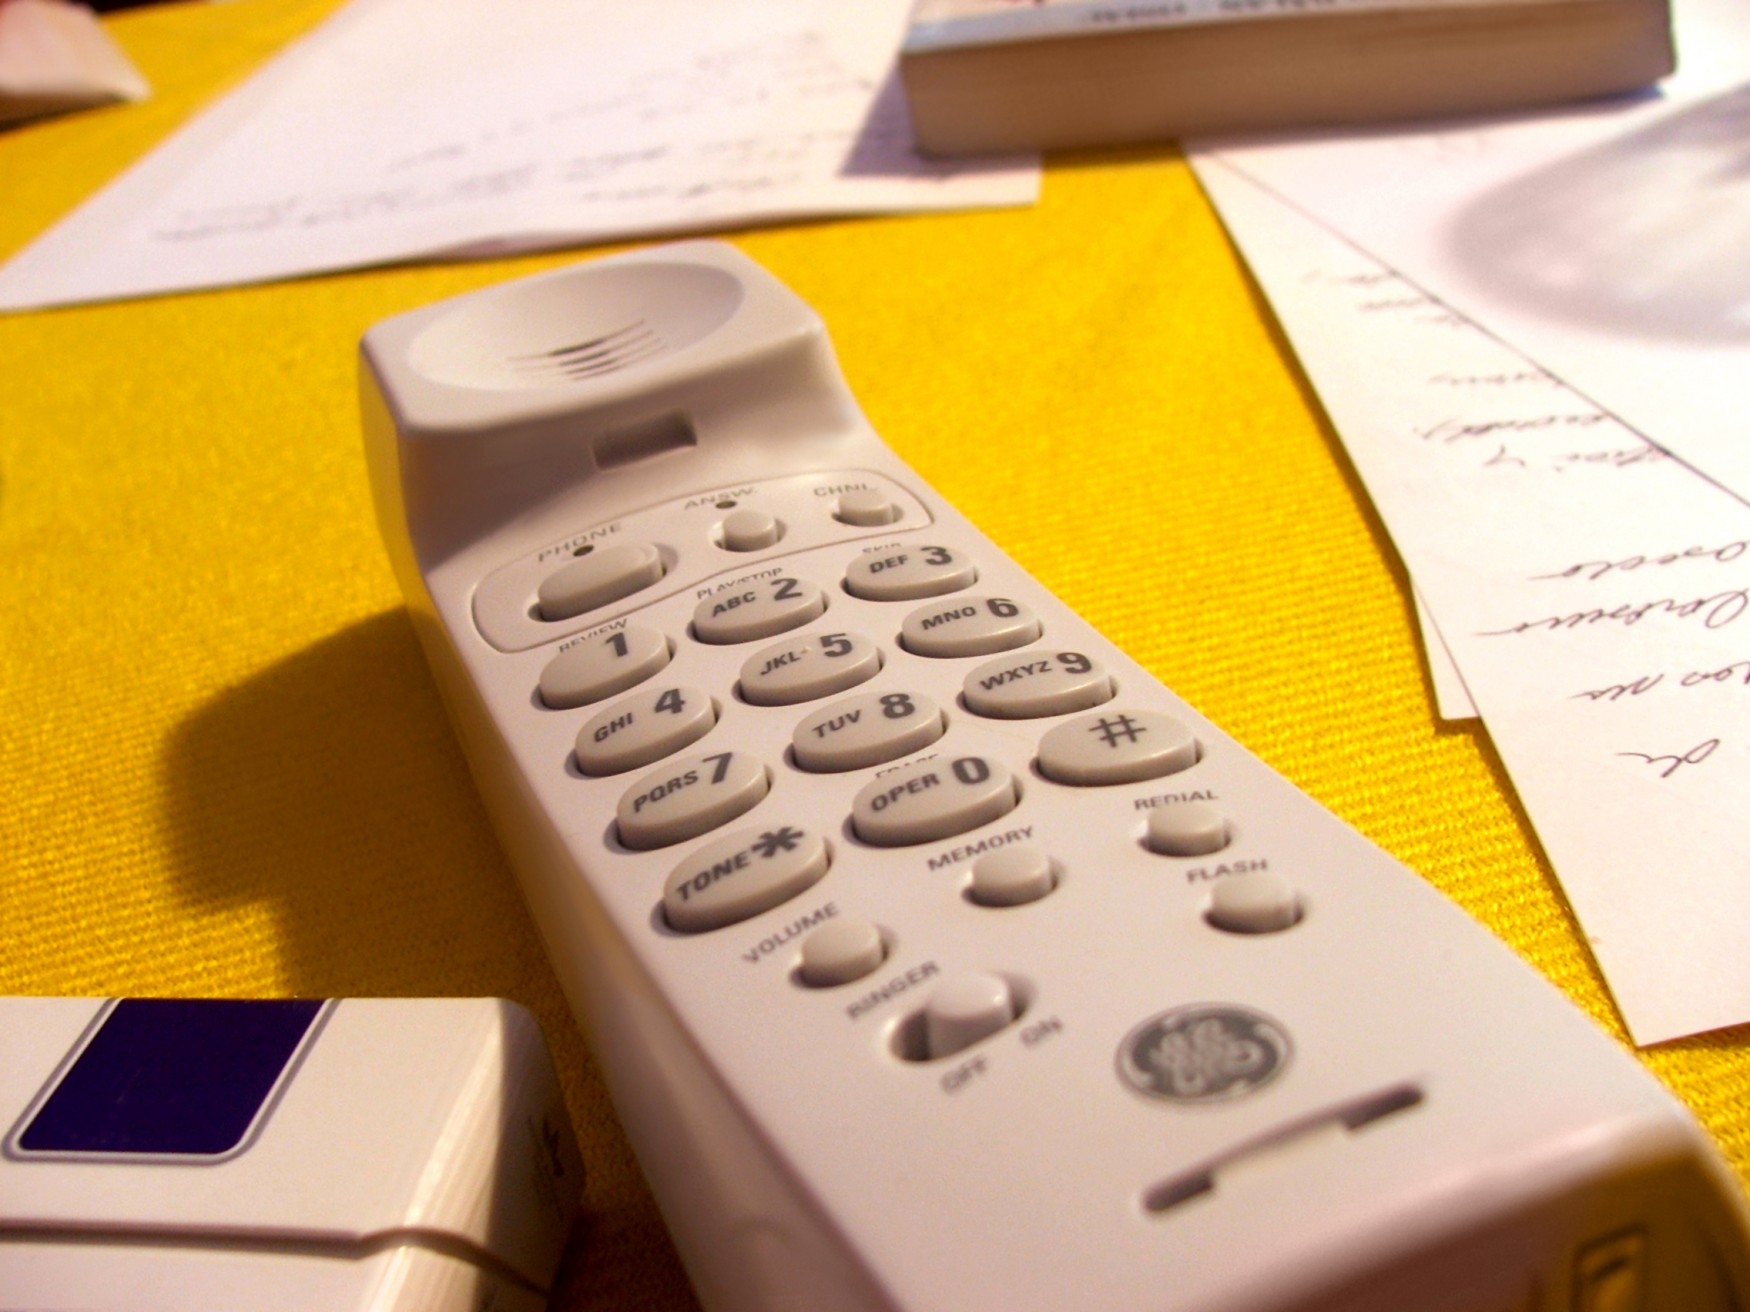 a white cordless phone on a yellow surface